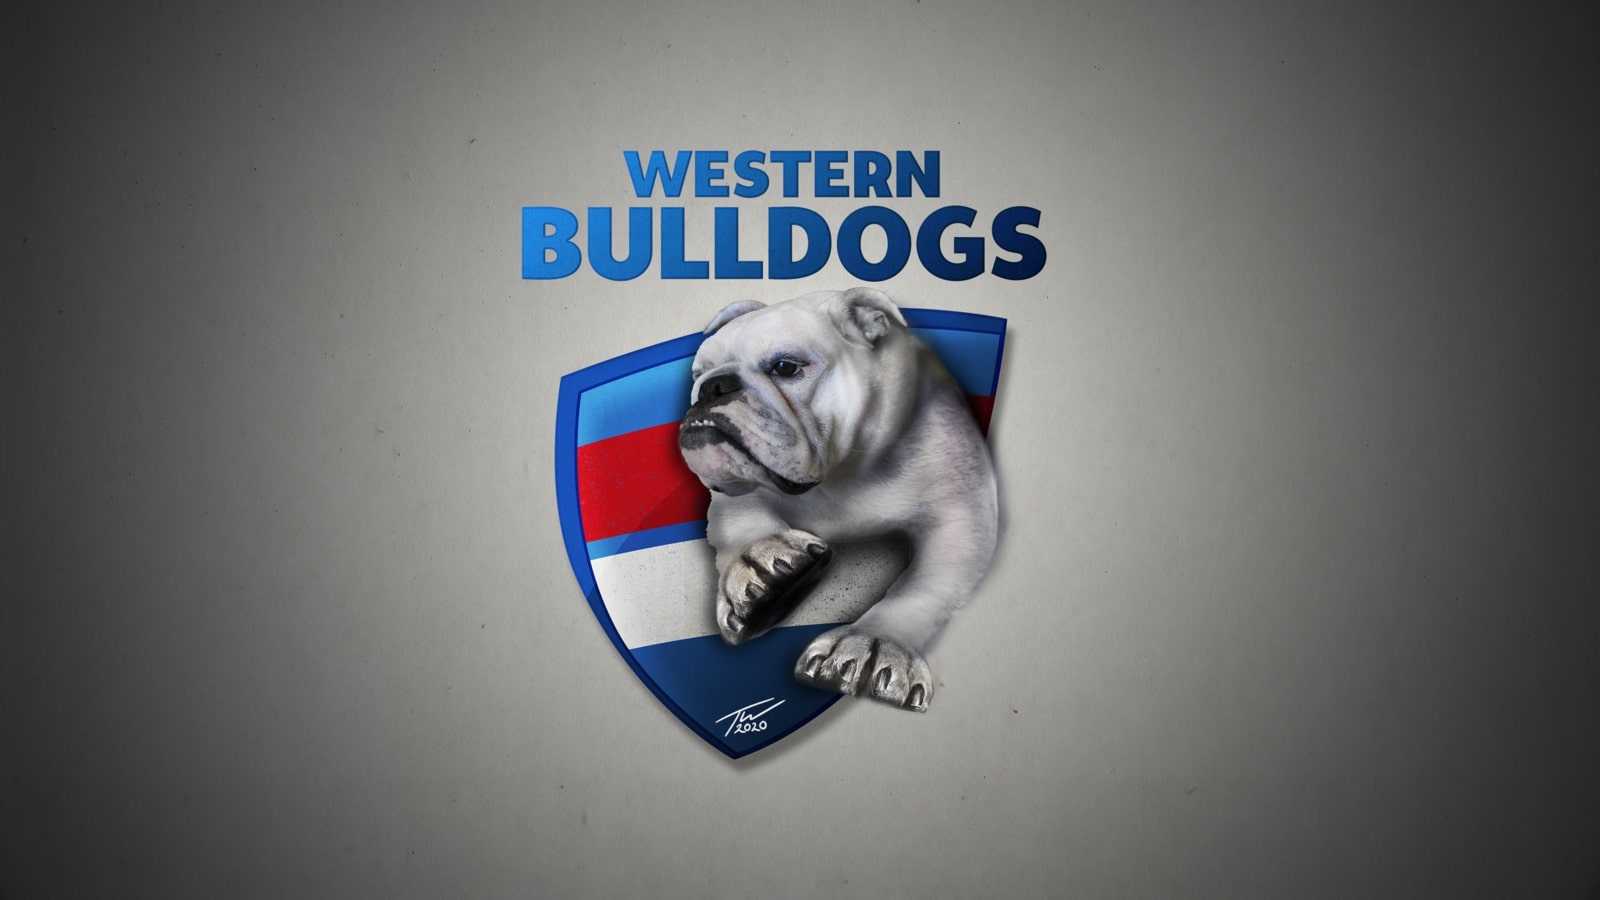 Cool Western Bulldogs Wallpapers - We Know You Need A New ...